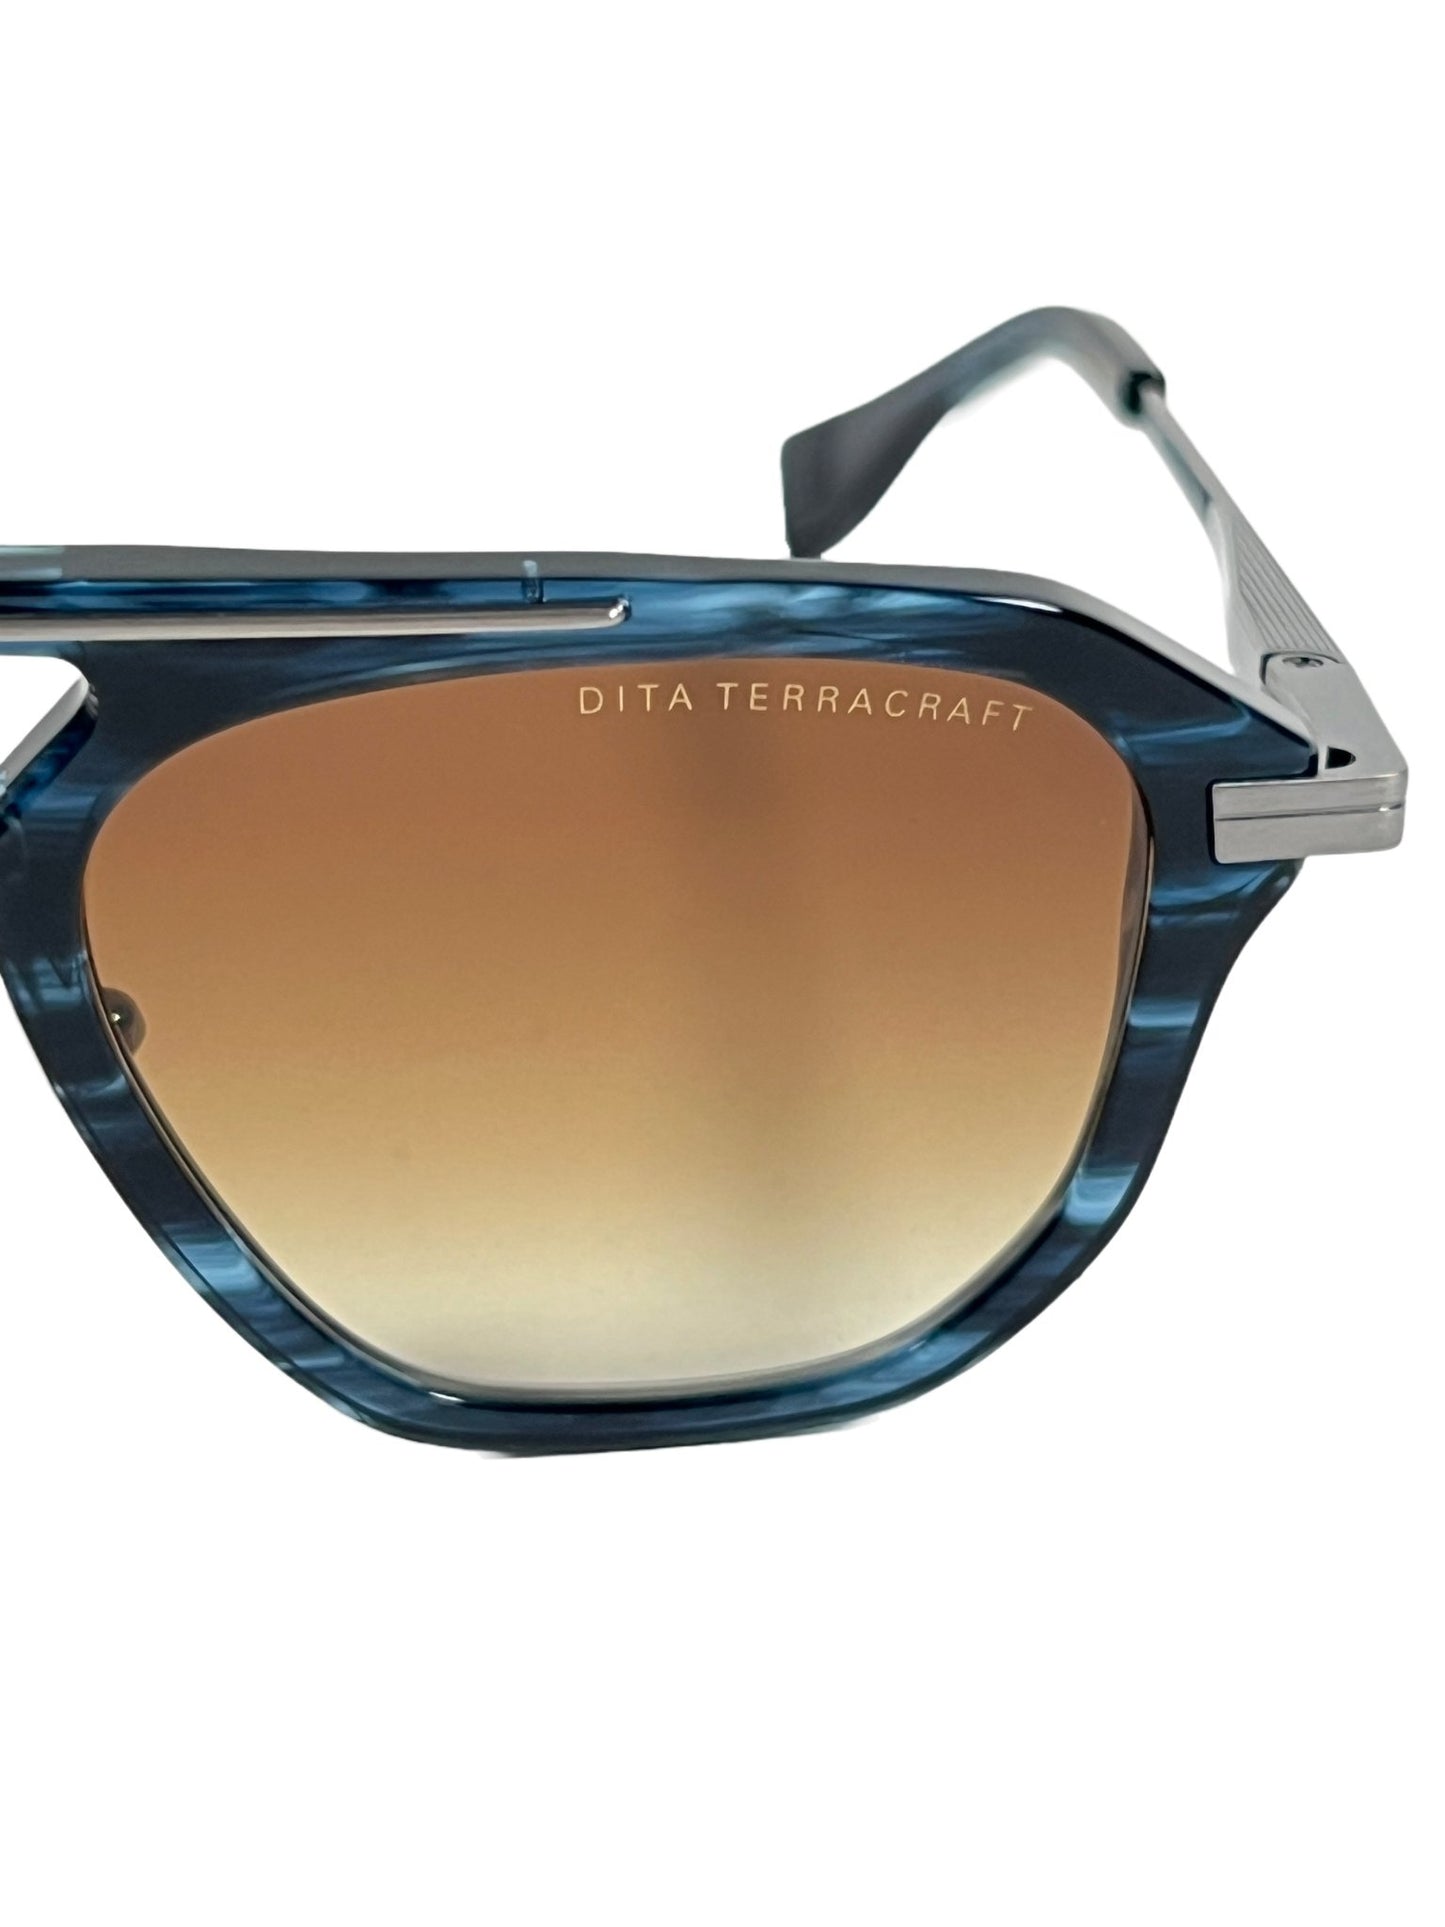 A pair of DITA sunglasses with a blue-yellow frame and brown lenses.